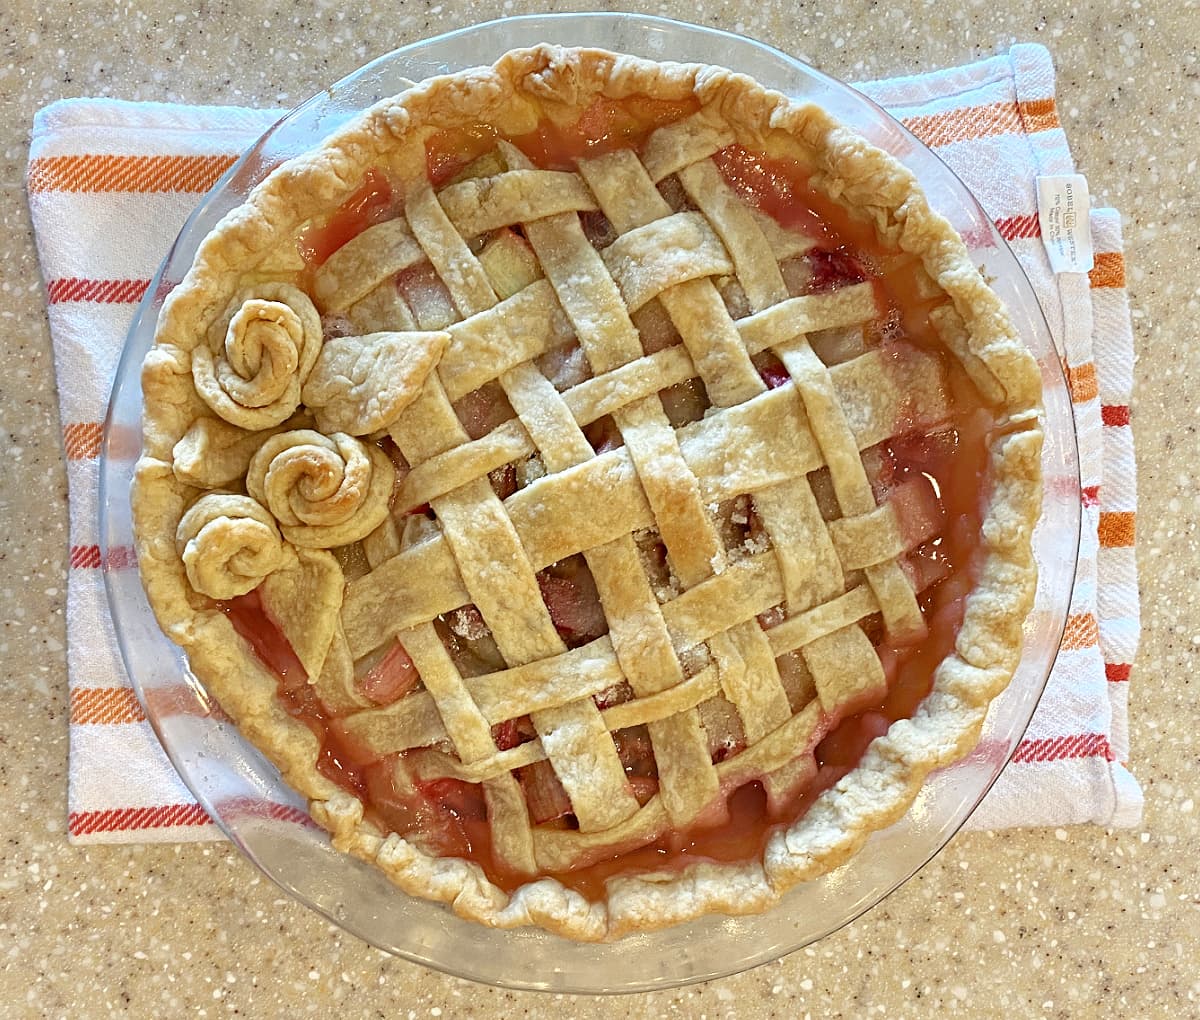 Baked pie with lattice top and pastry roses.